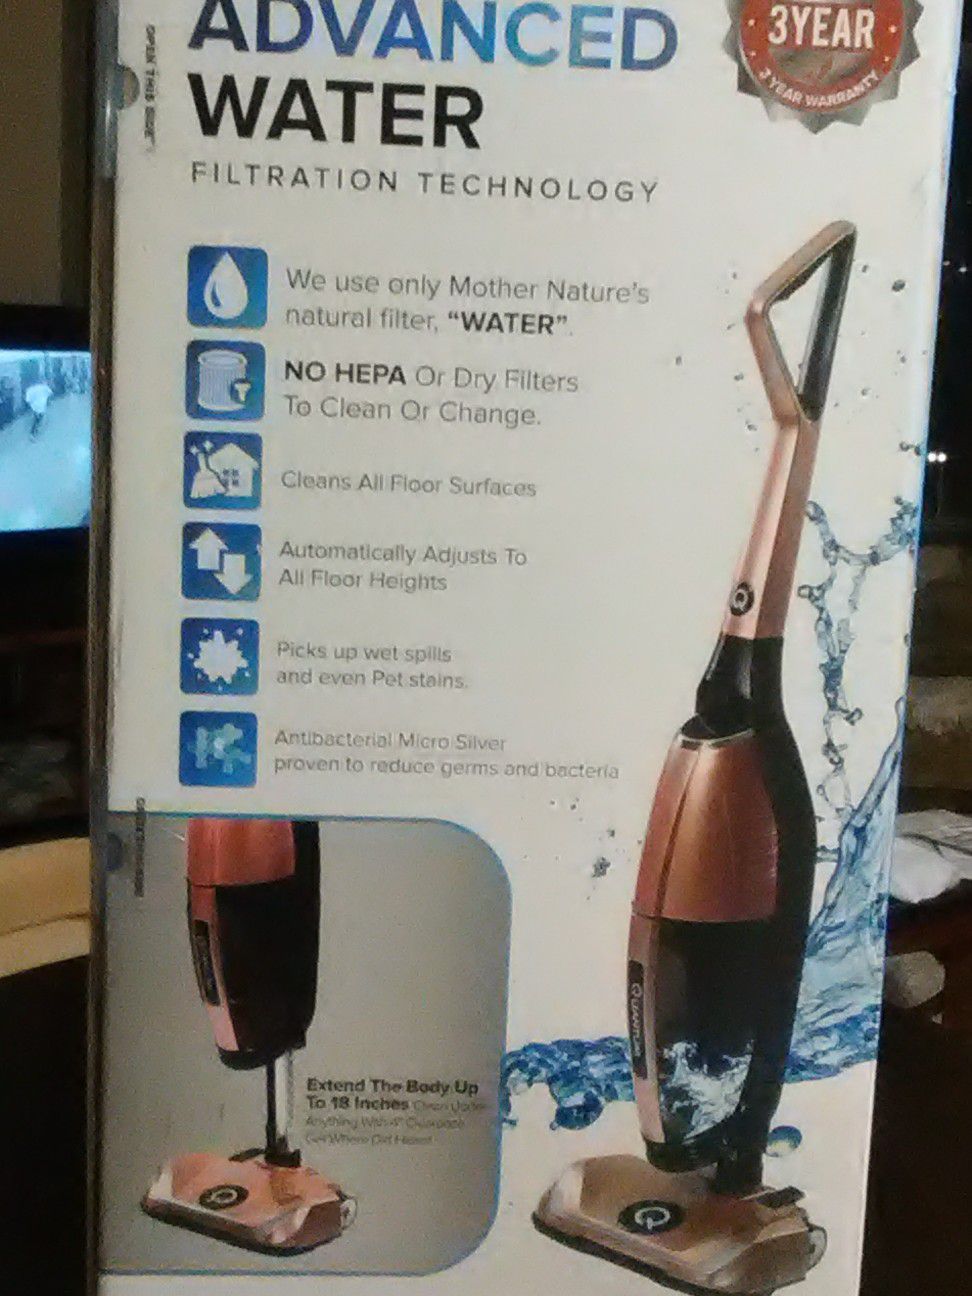 THE QUANTUM X " THE ONLY UPRIGHT VACUUM WITH WATER FILTRATION TECHNOLOGY"